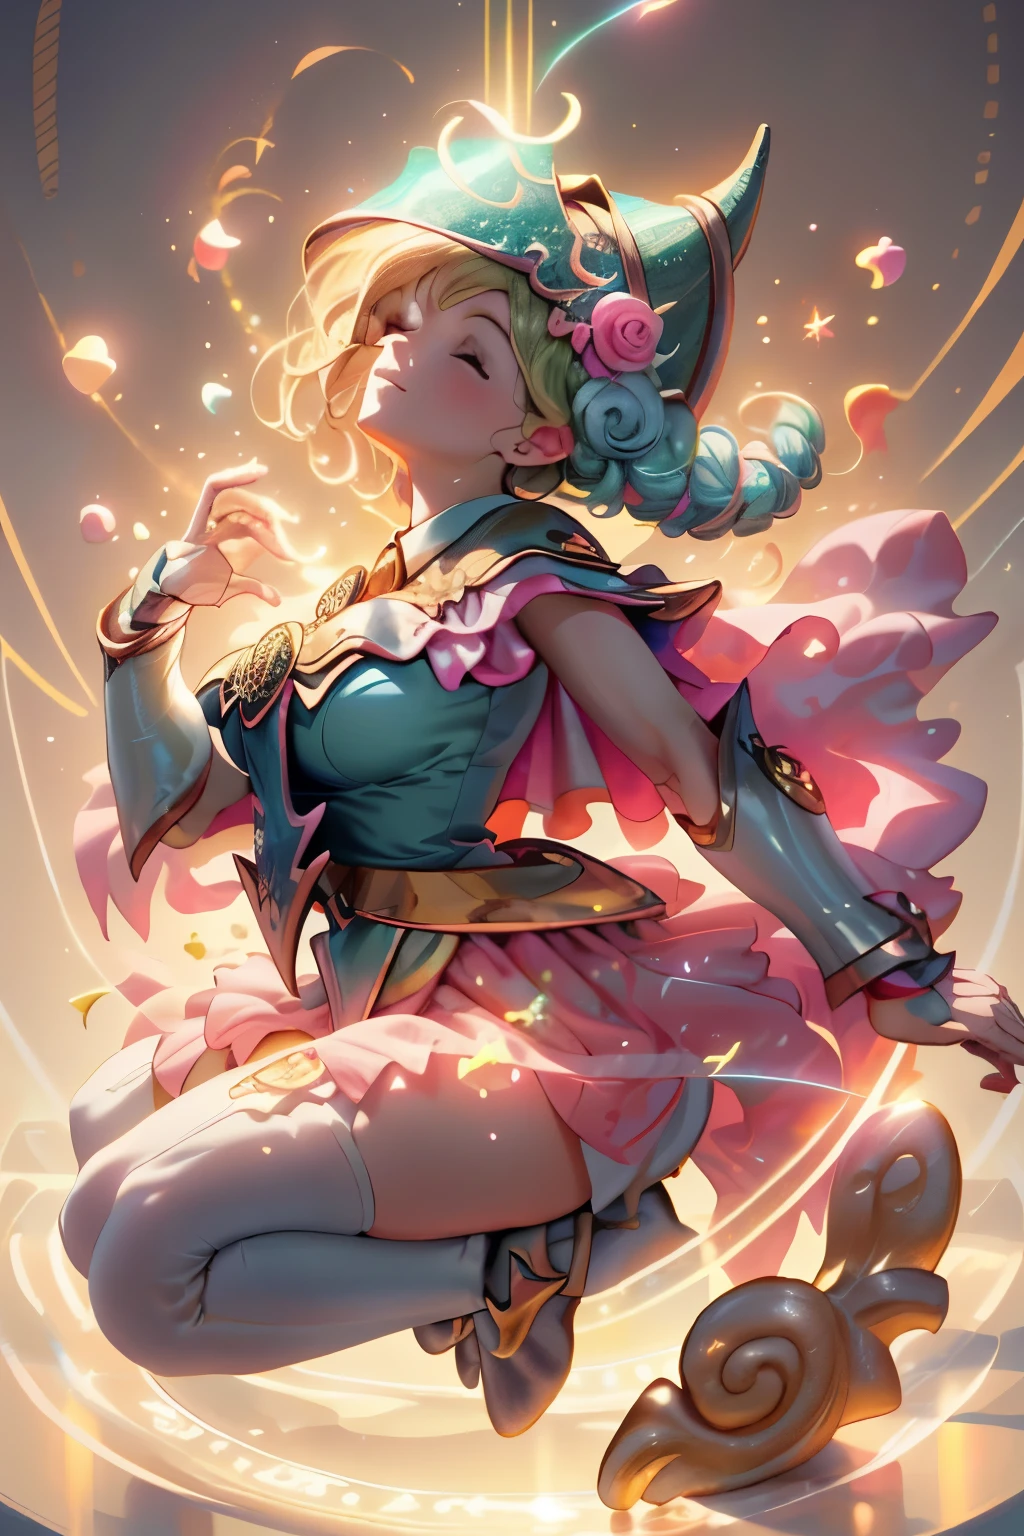 Masterpiece:1.2), (The best quality:1.2), Perfect lighting, dark magician girl, casting a spell and floating in the air, big tits, neckline, magic background. Transparent hearts in the environment,  She wears heels